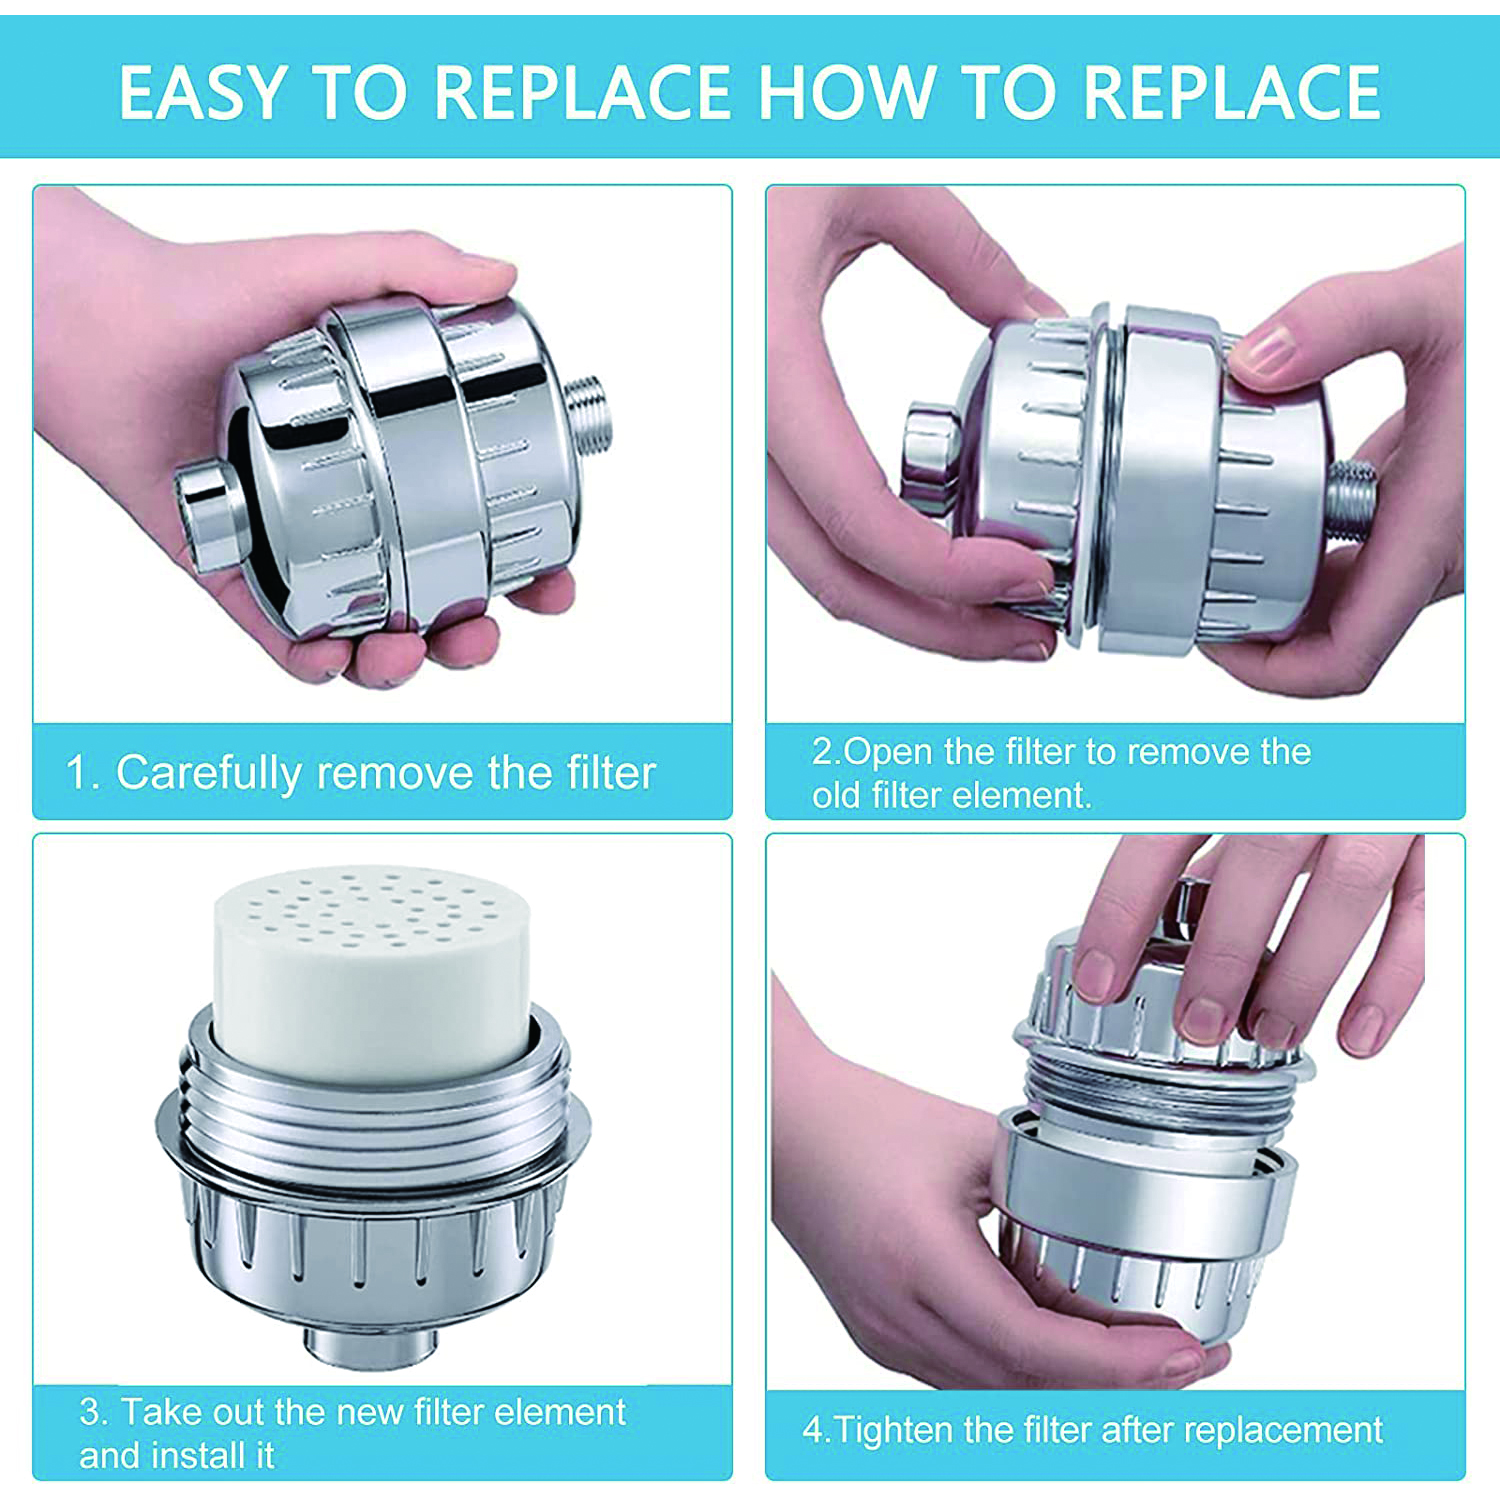 Water Filter To Remove Sodium15-stage Shower Filter For Hard